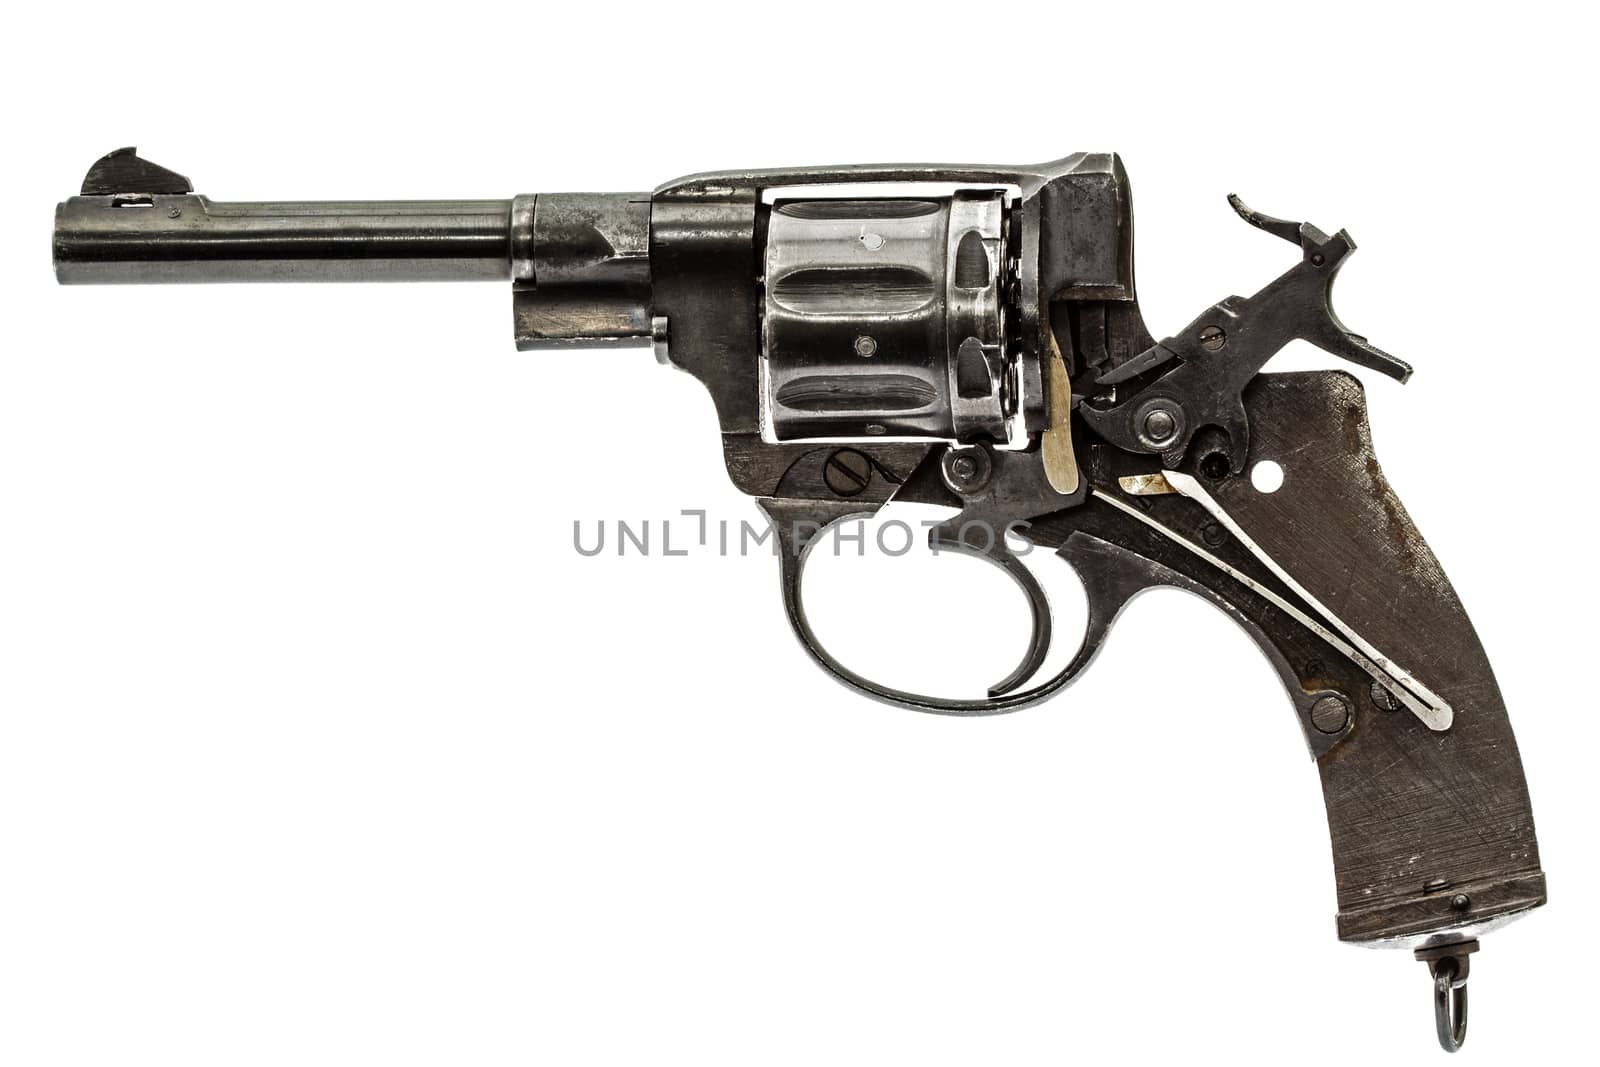 Disassembled revolver, pistol mechanism with the hammer cocked,  by kostiuchenko